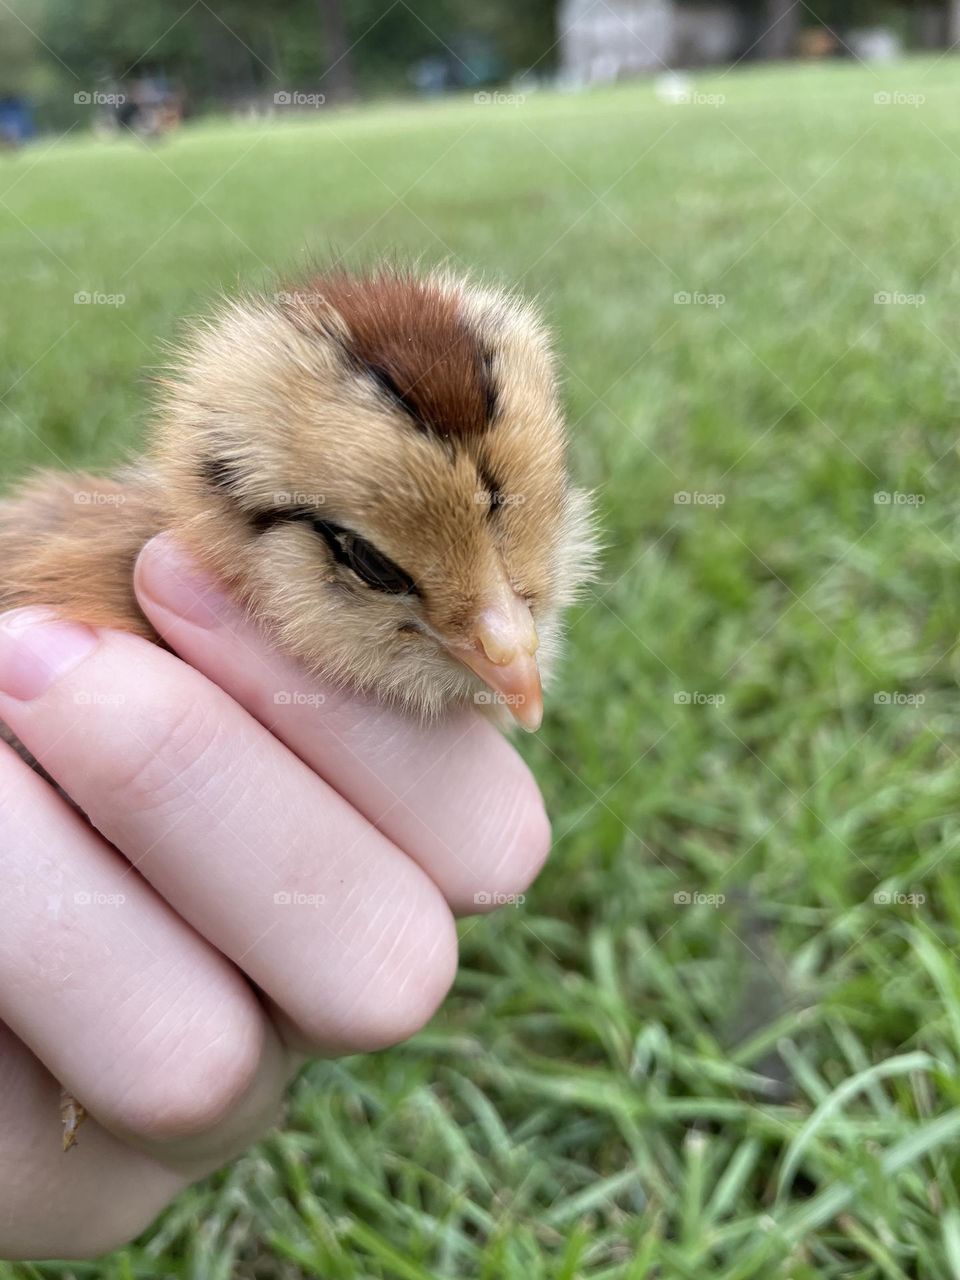 A little baby chick. 